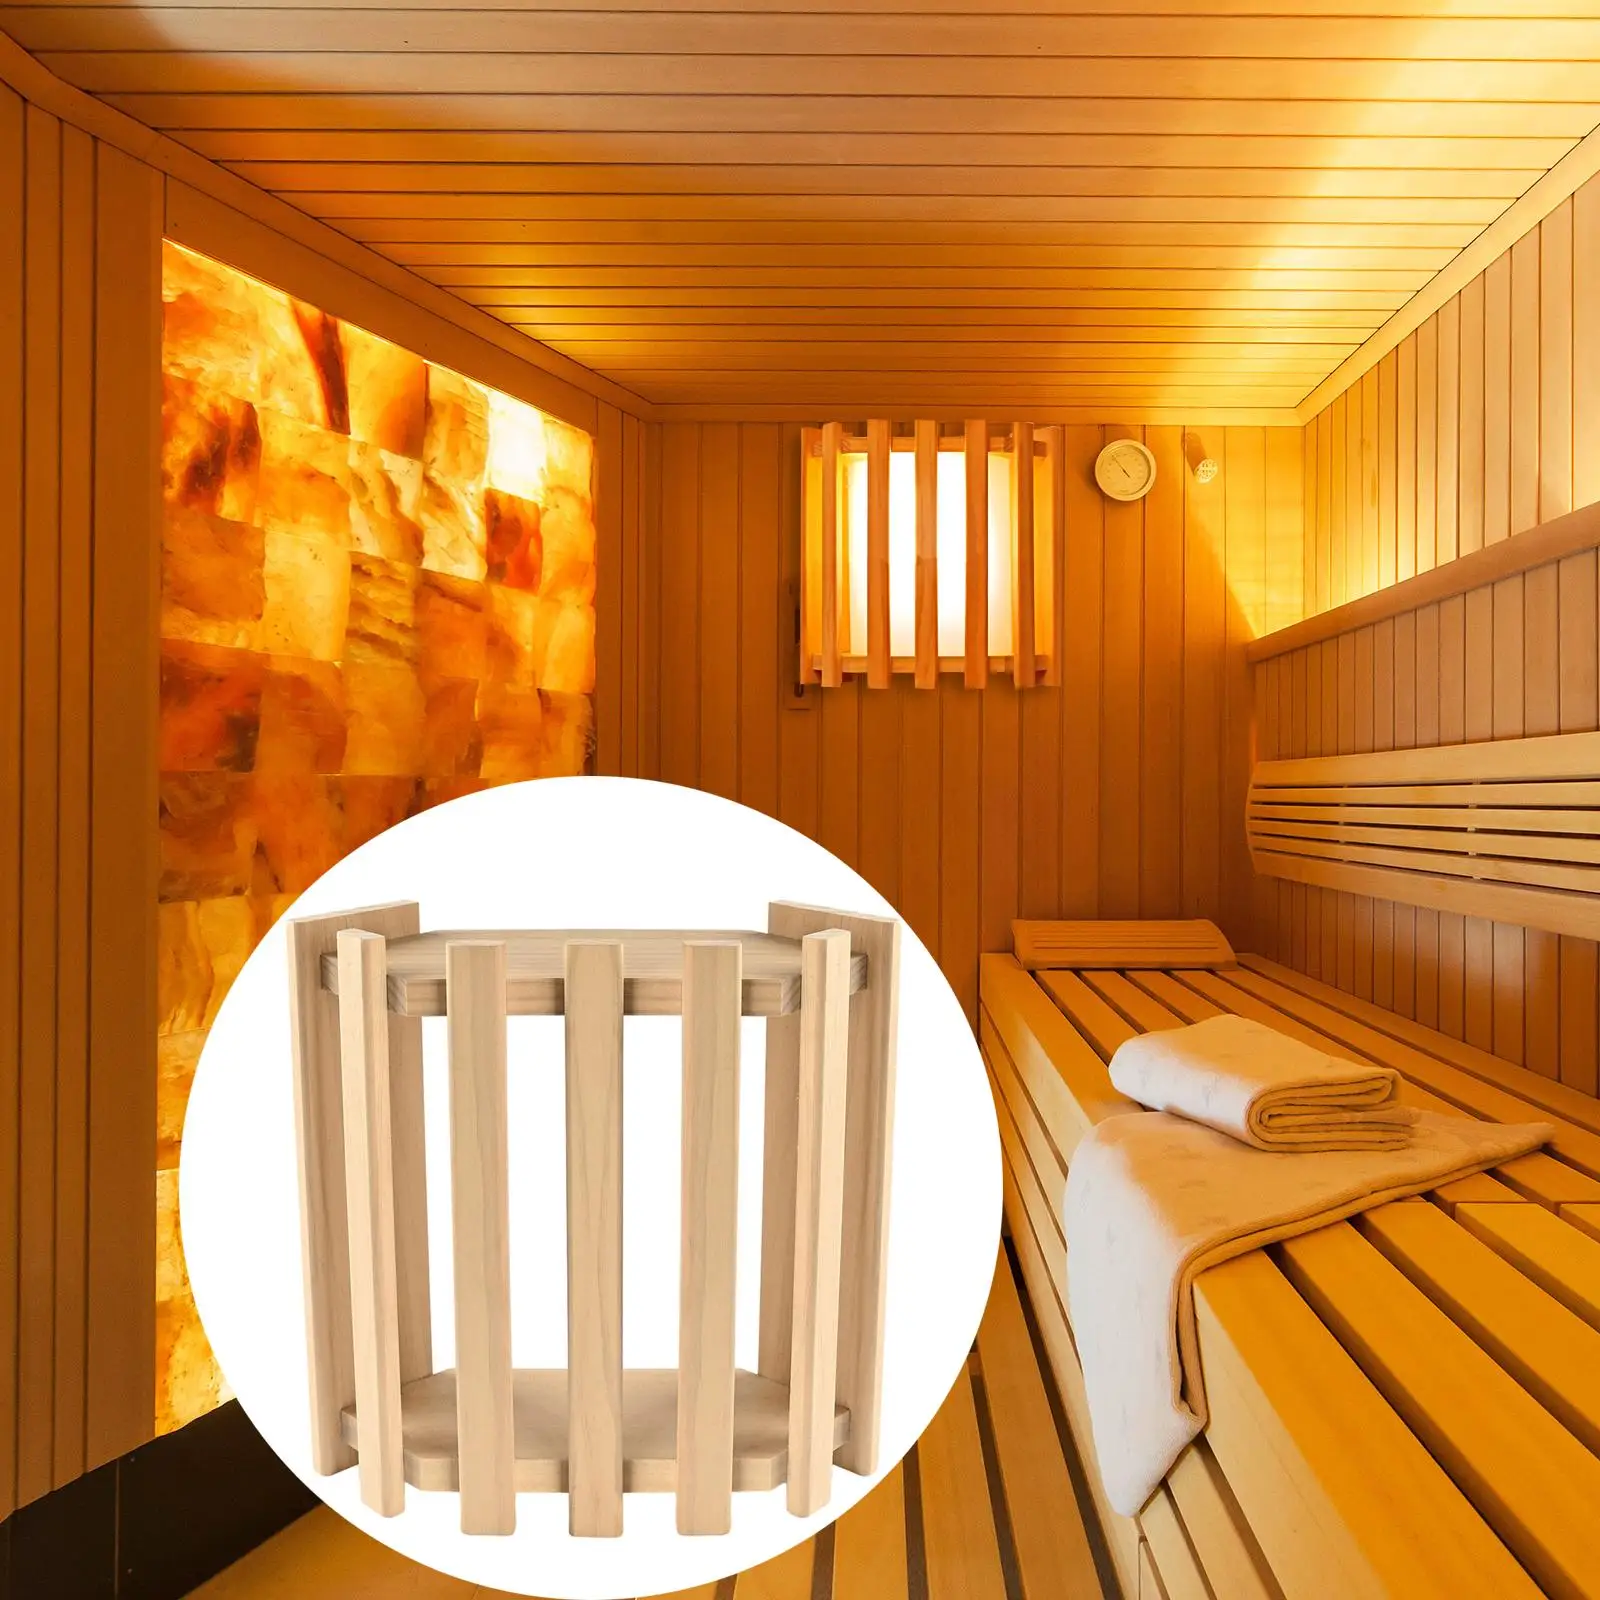 Sauna Light Lamp Shade Light Protective Cover Steam Room Light Shade for Home Decoration SPA Decor High Temperature Sauna Rooms